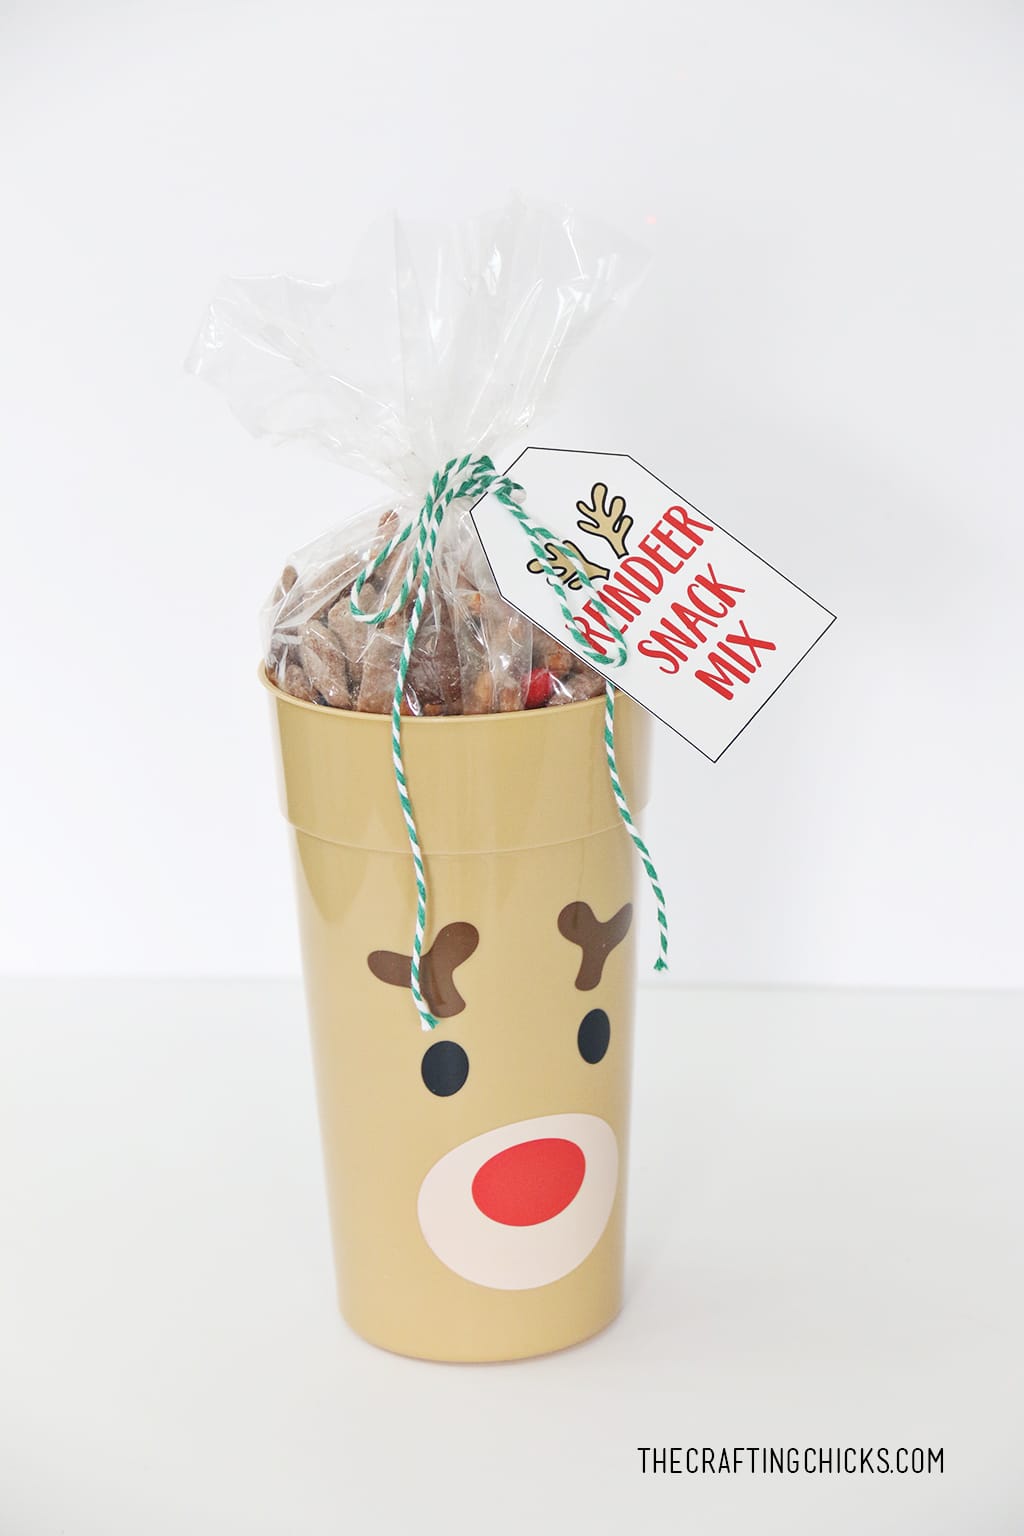 Reindeer Sack Mix inside plastic reindeer tumbler cup with gift tag.